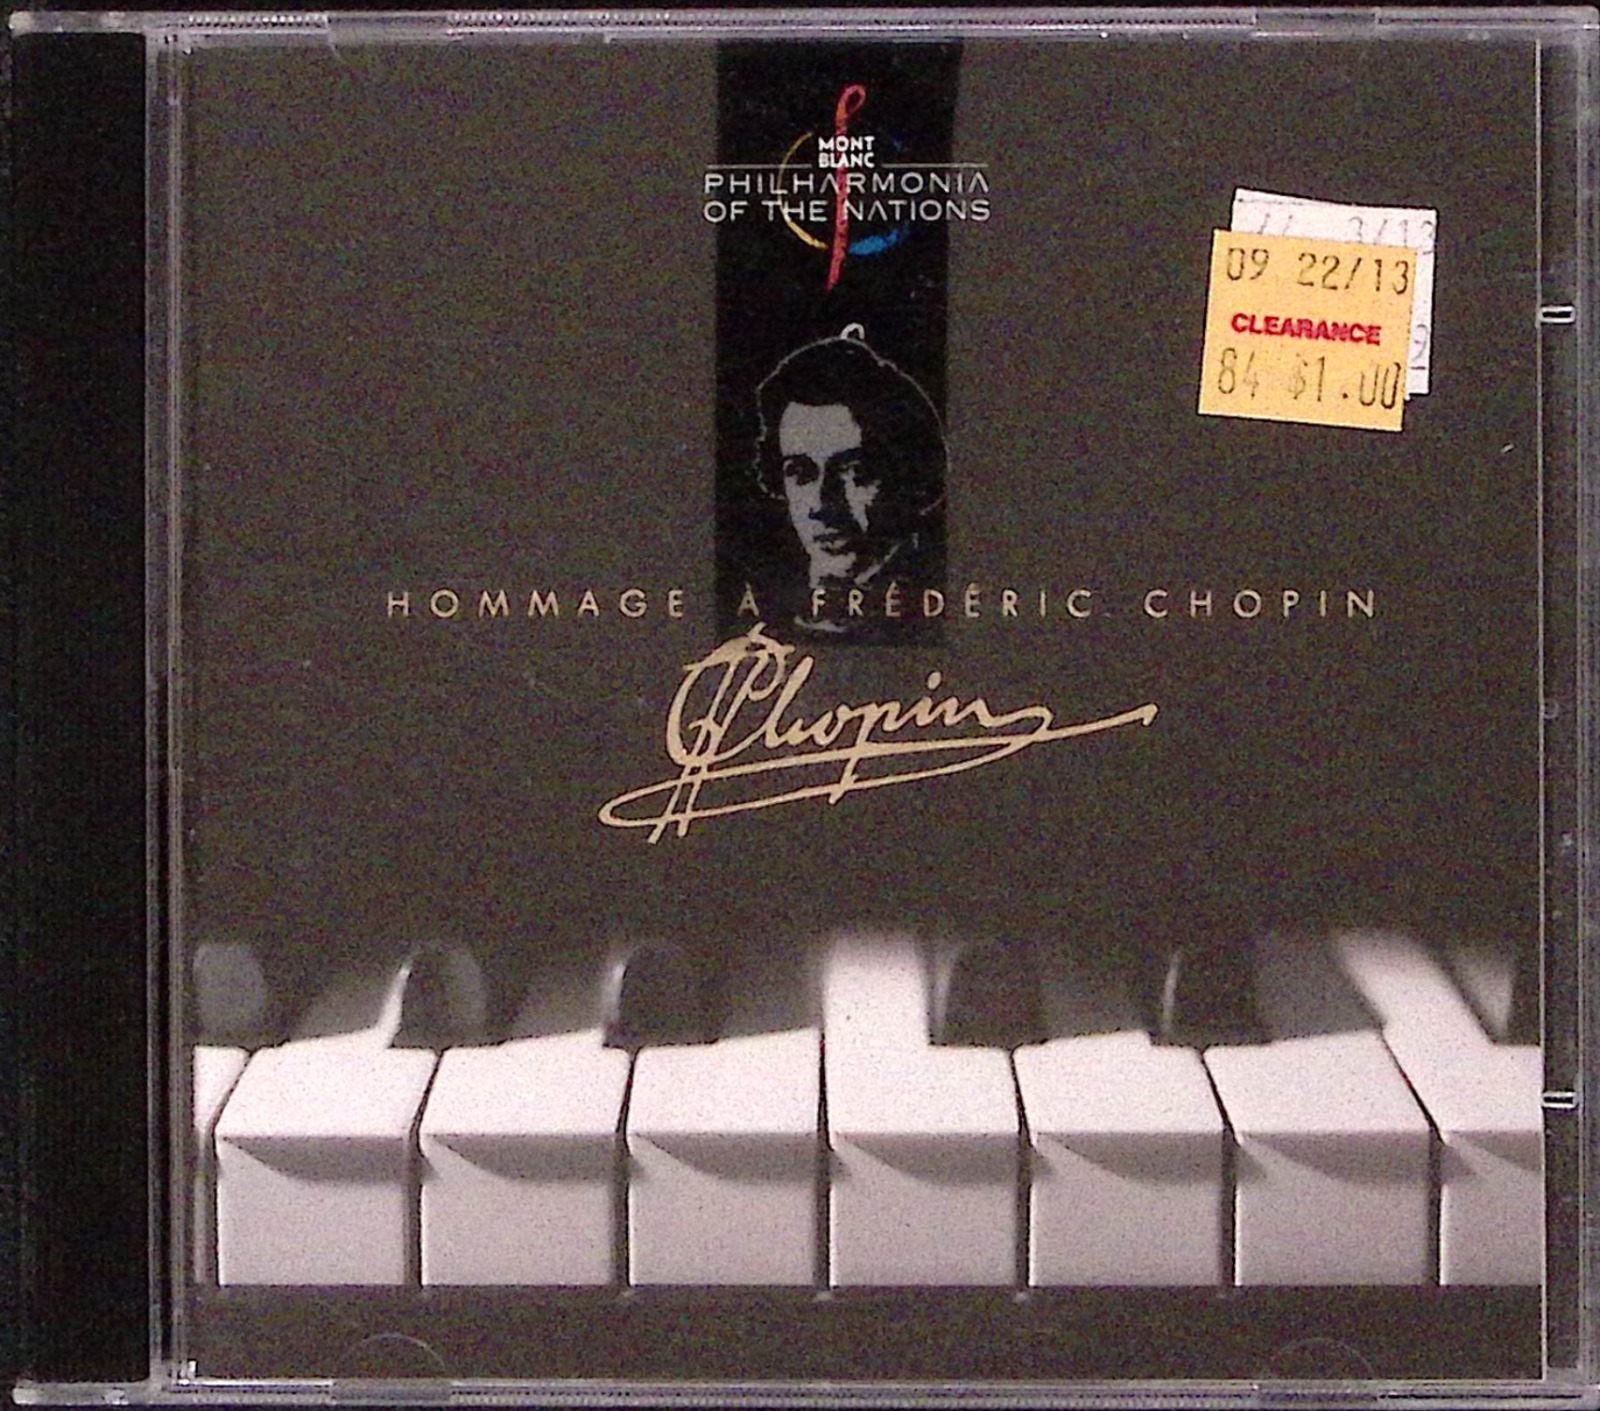 MONTBLANC PHILHARMONIA OF THE NATIONS HOMMAGE A FREDERIC CHOPIN FRANTZ  CD 976